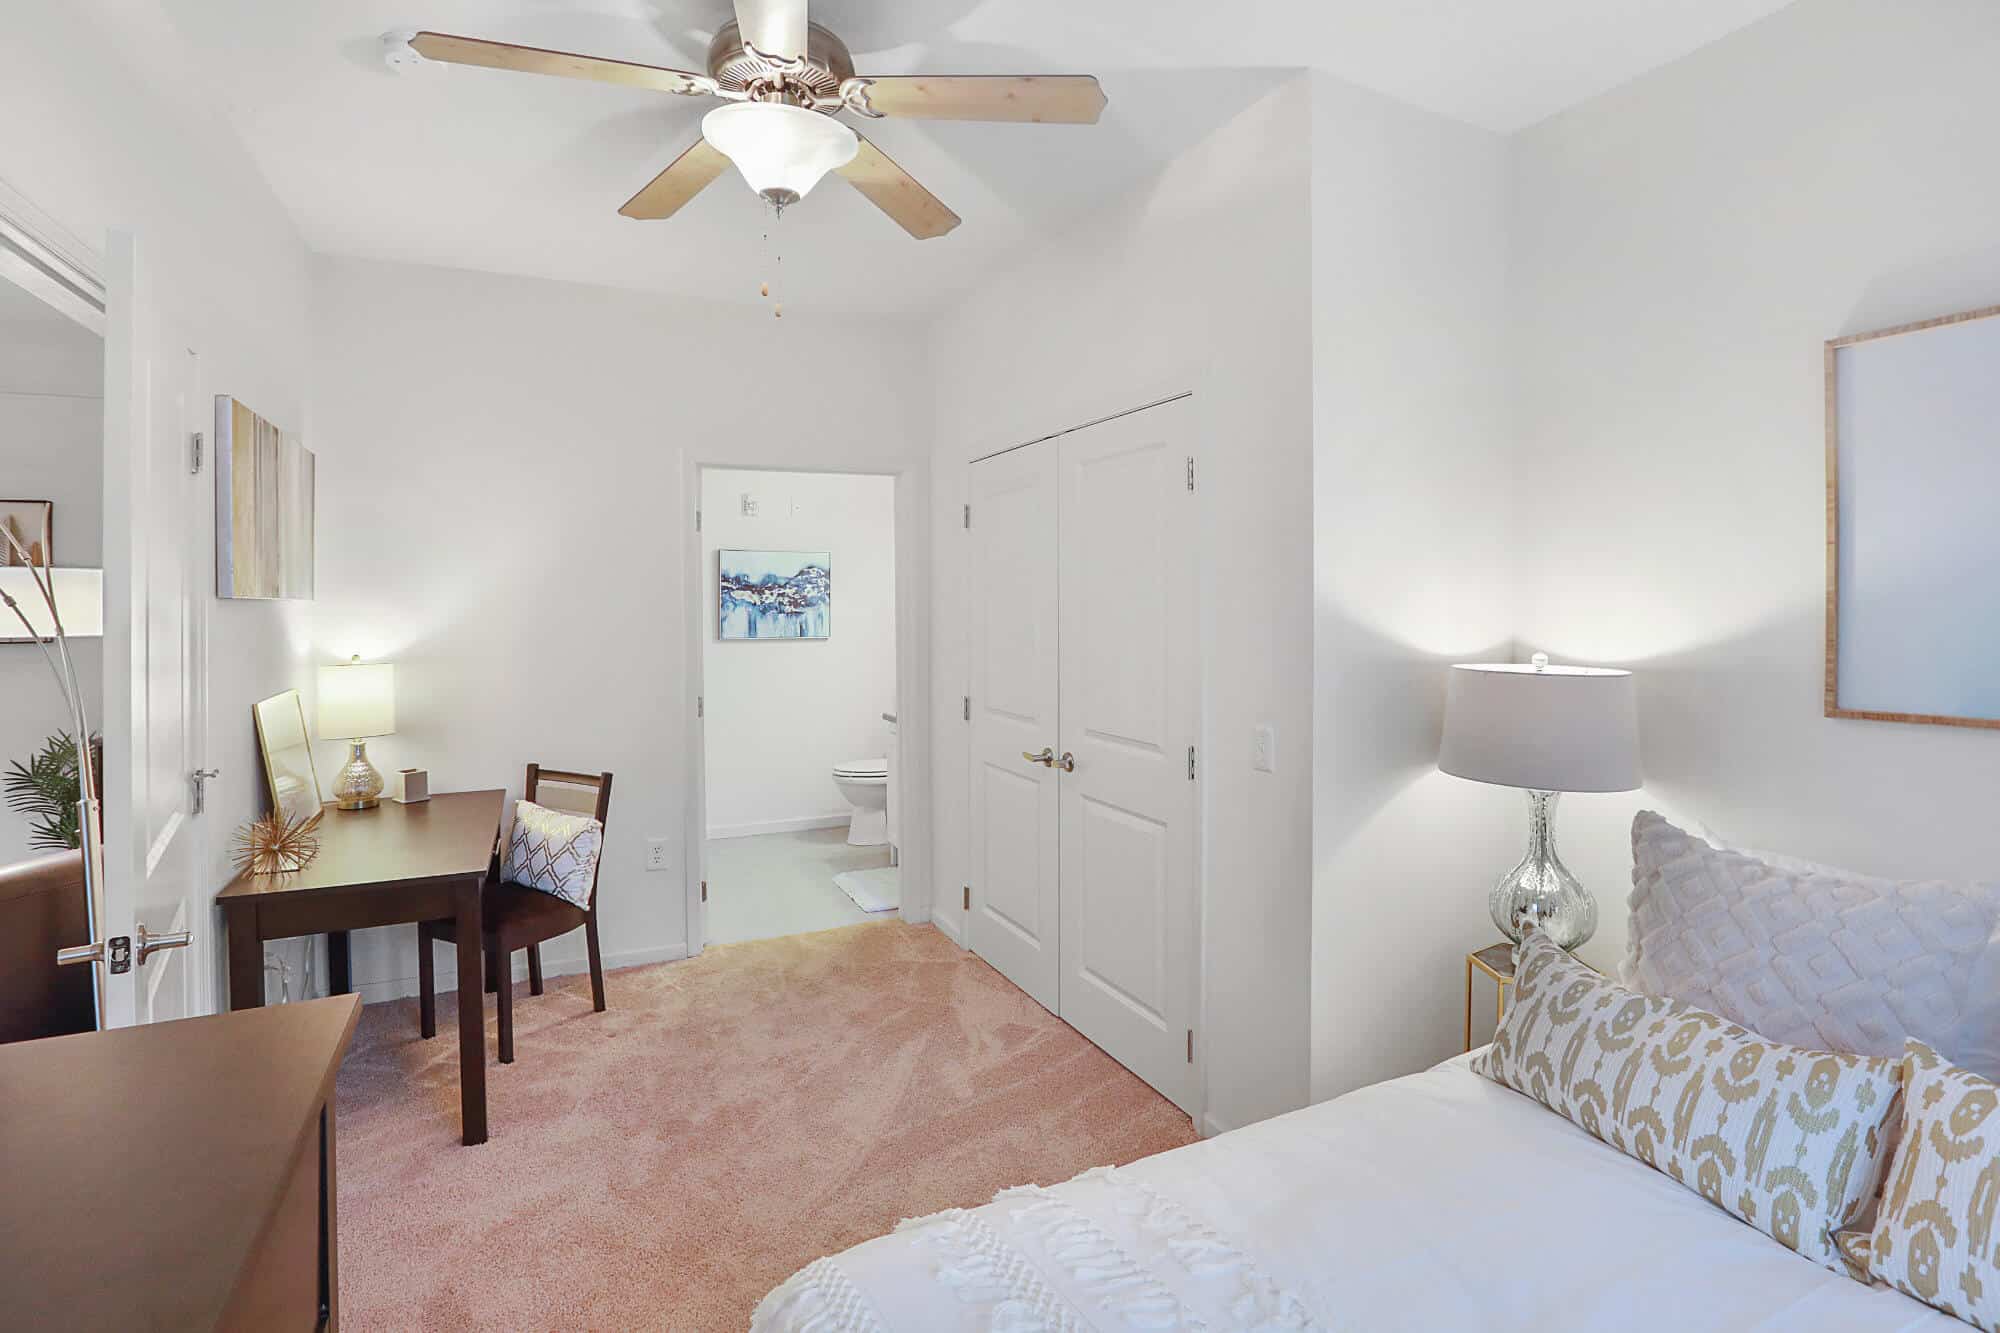 greene crossing off campus apartments near the university of south carolina private fully furnished bedrooms attached bathroom and walk in closet